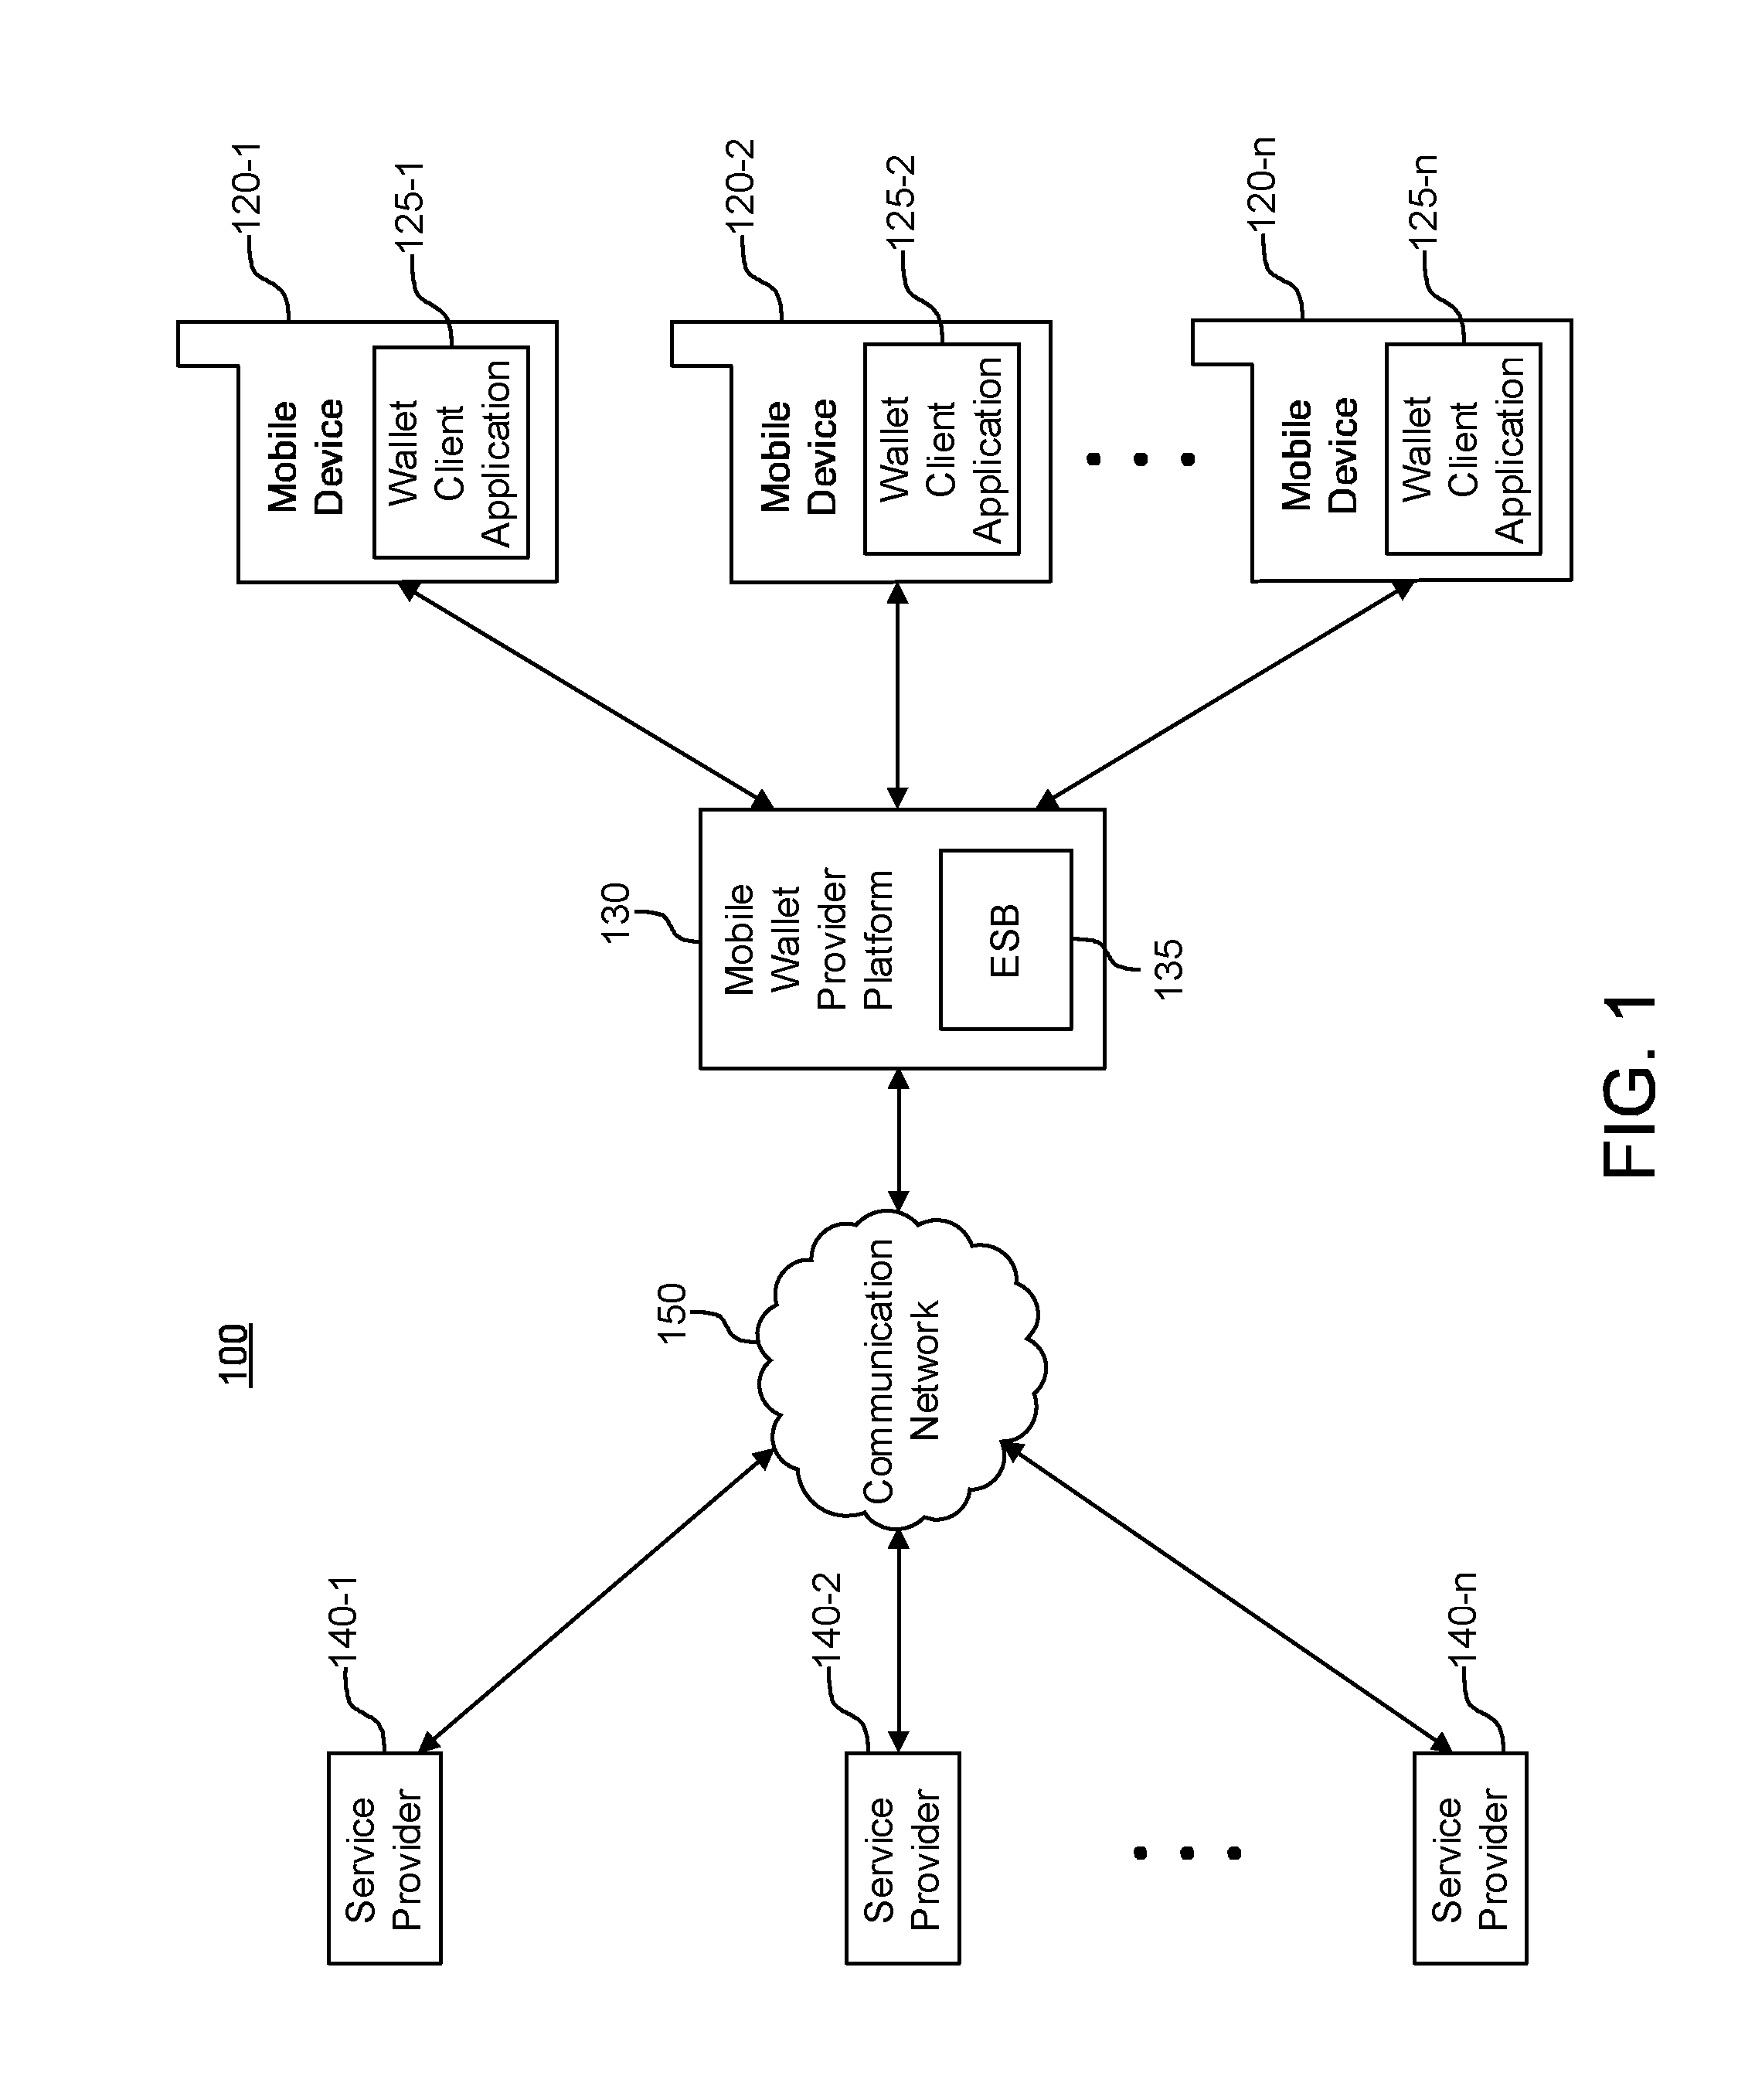 Systems, methods, and computer program products for service processing